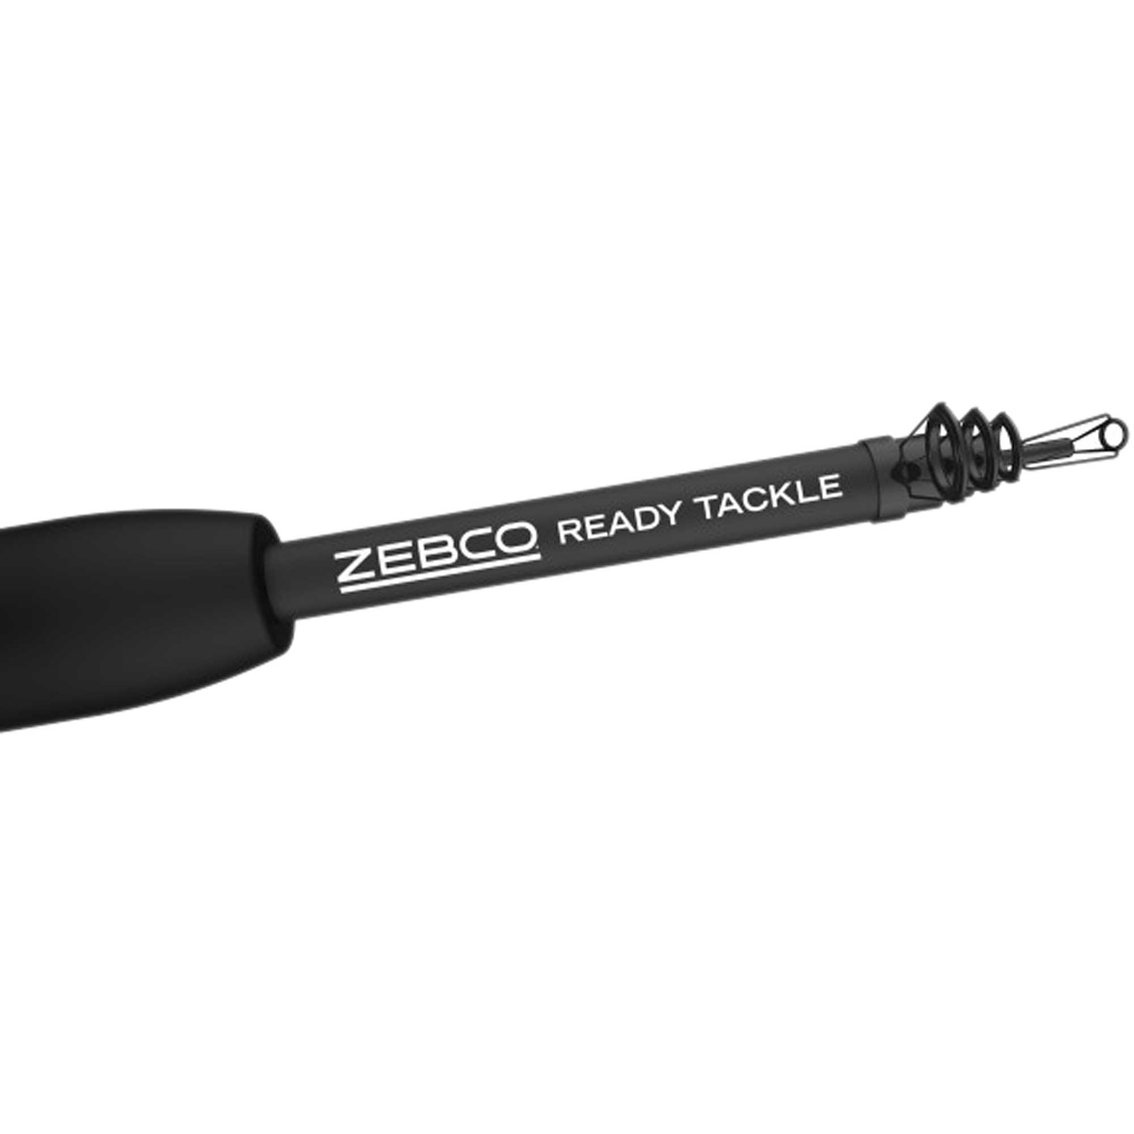 Zebco Ready Tackle Telescopic Fishing Rod, Reel And Tackle Wallet 3 Pc. Set, Freshwater Rods & Reels, Sports & Outdoors